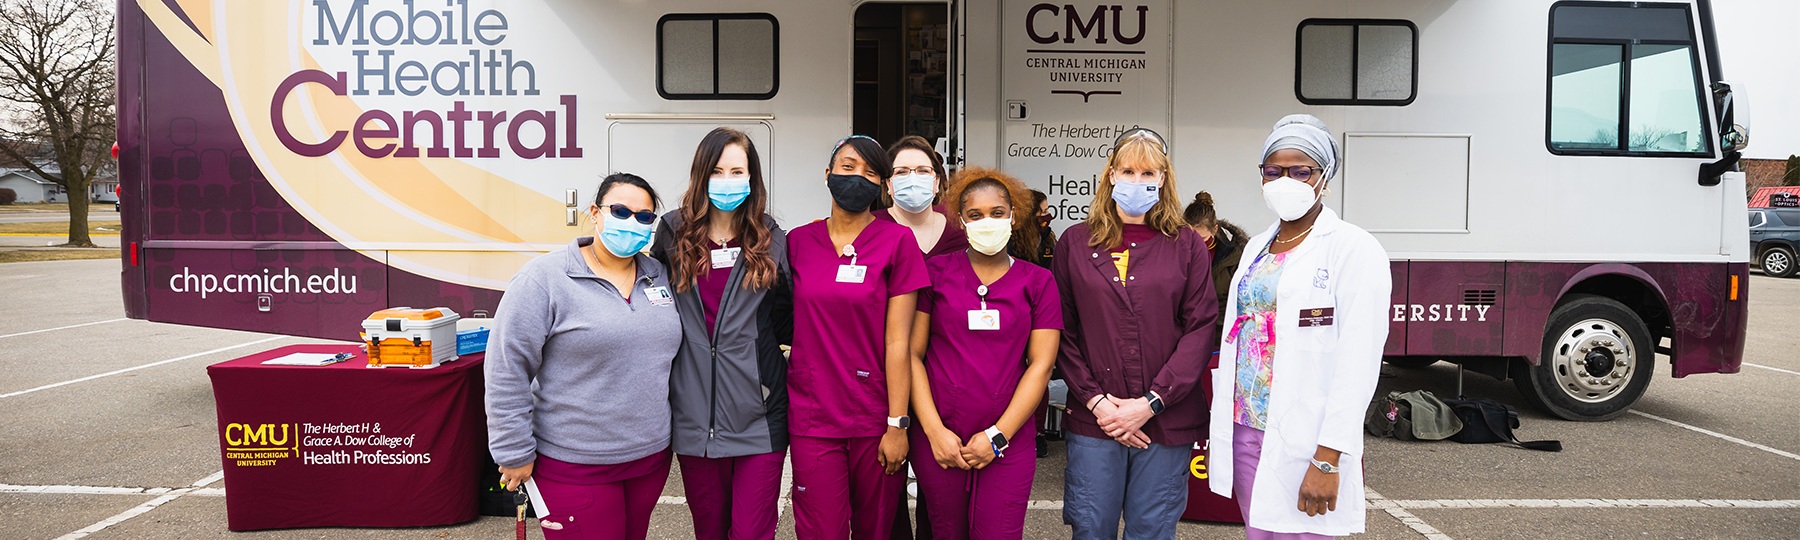 rn students standing in front of the Mobile Health Central bus